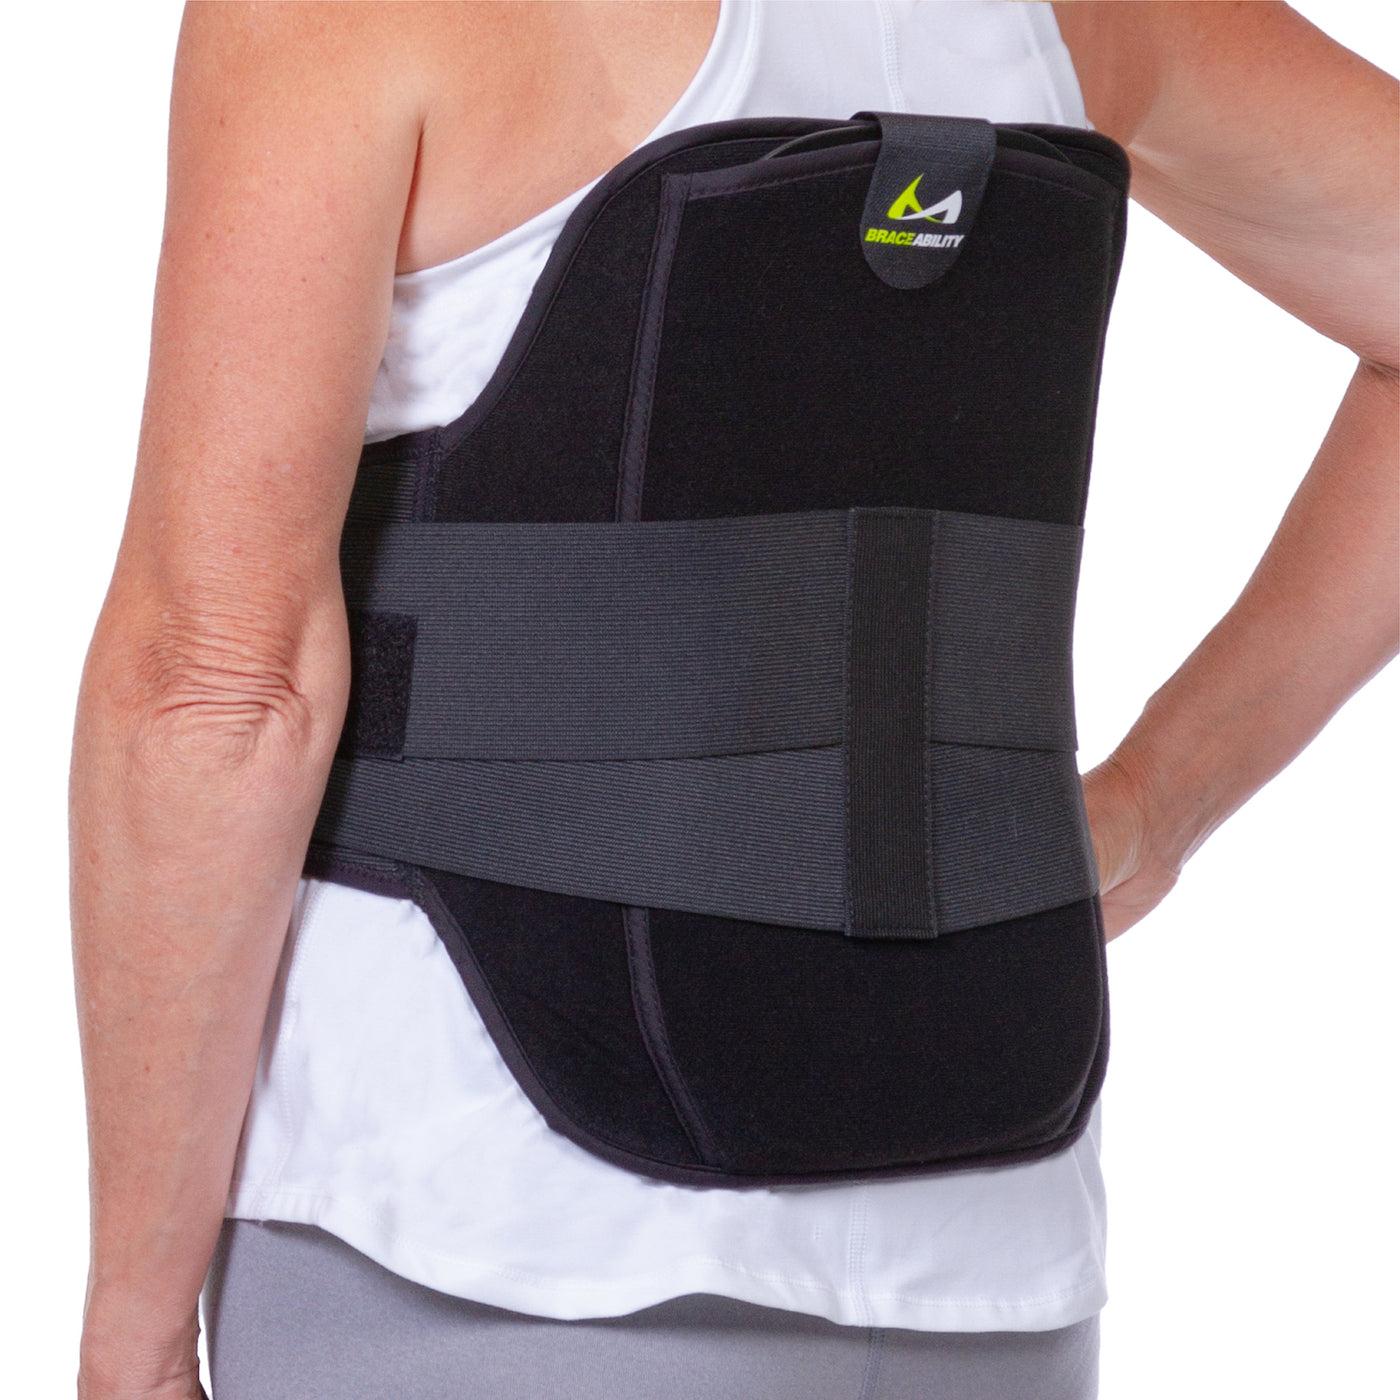  BraceAbility Back Brace for Lower Back Pain - Lumbar Corset  Back Support Belt for Men and Women, Scoliosis, Sciatica Pain, Spinal  Stenosis, Herniated Disc Relief - FSA Eligible, Fits 28 